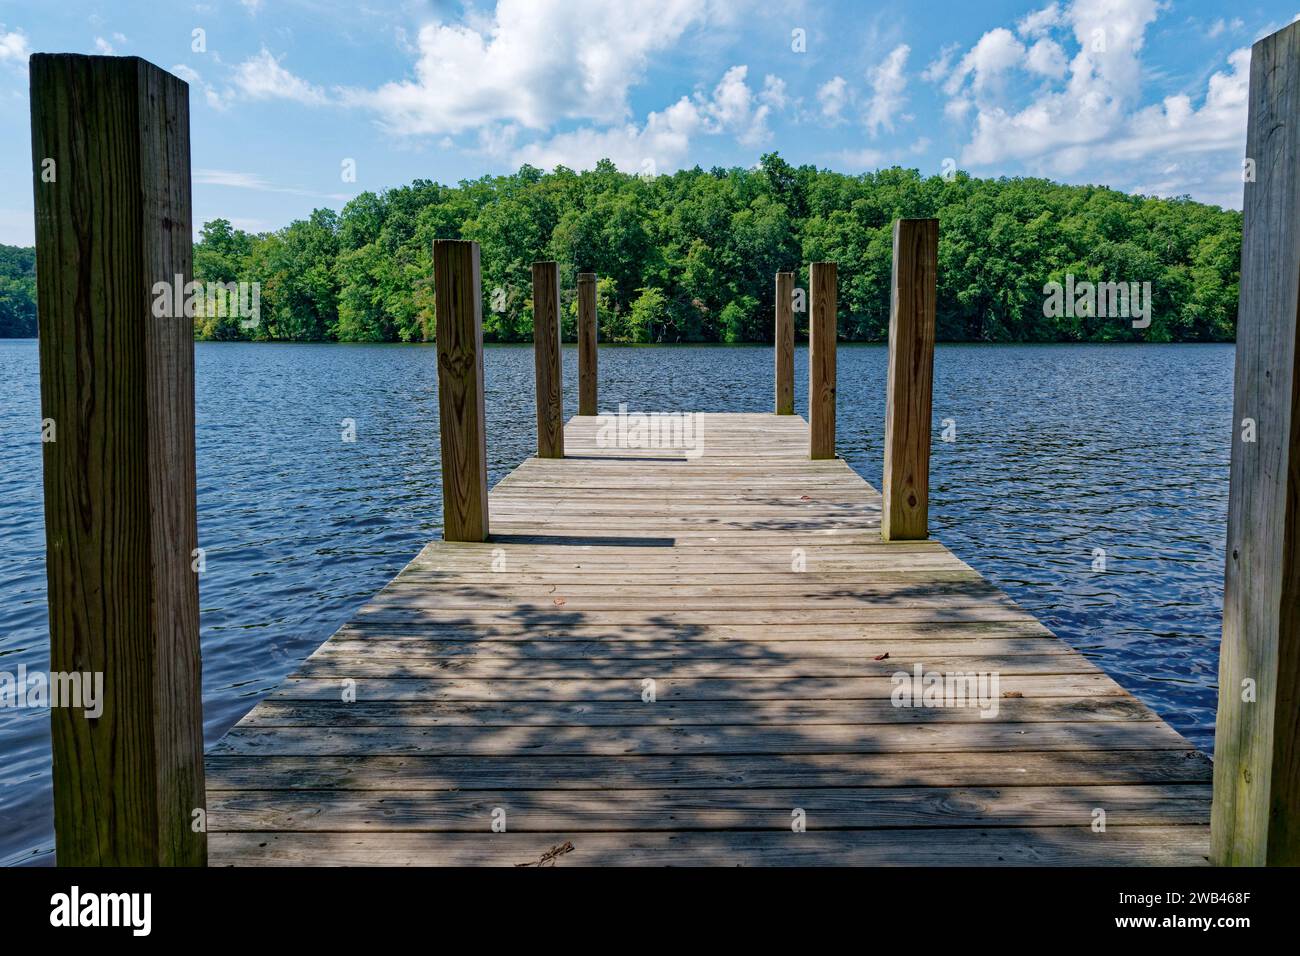 Standing on the wooden dock looking out at the lake with the forest in the background at a park on a sunny day in late summertime Stock Photo